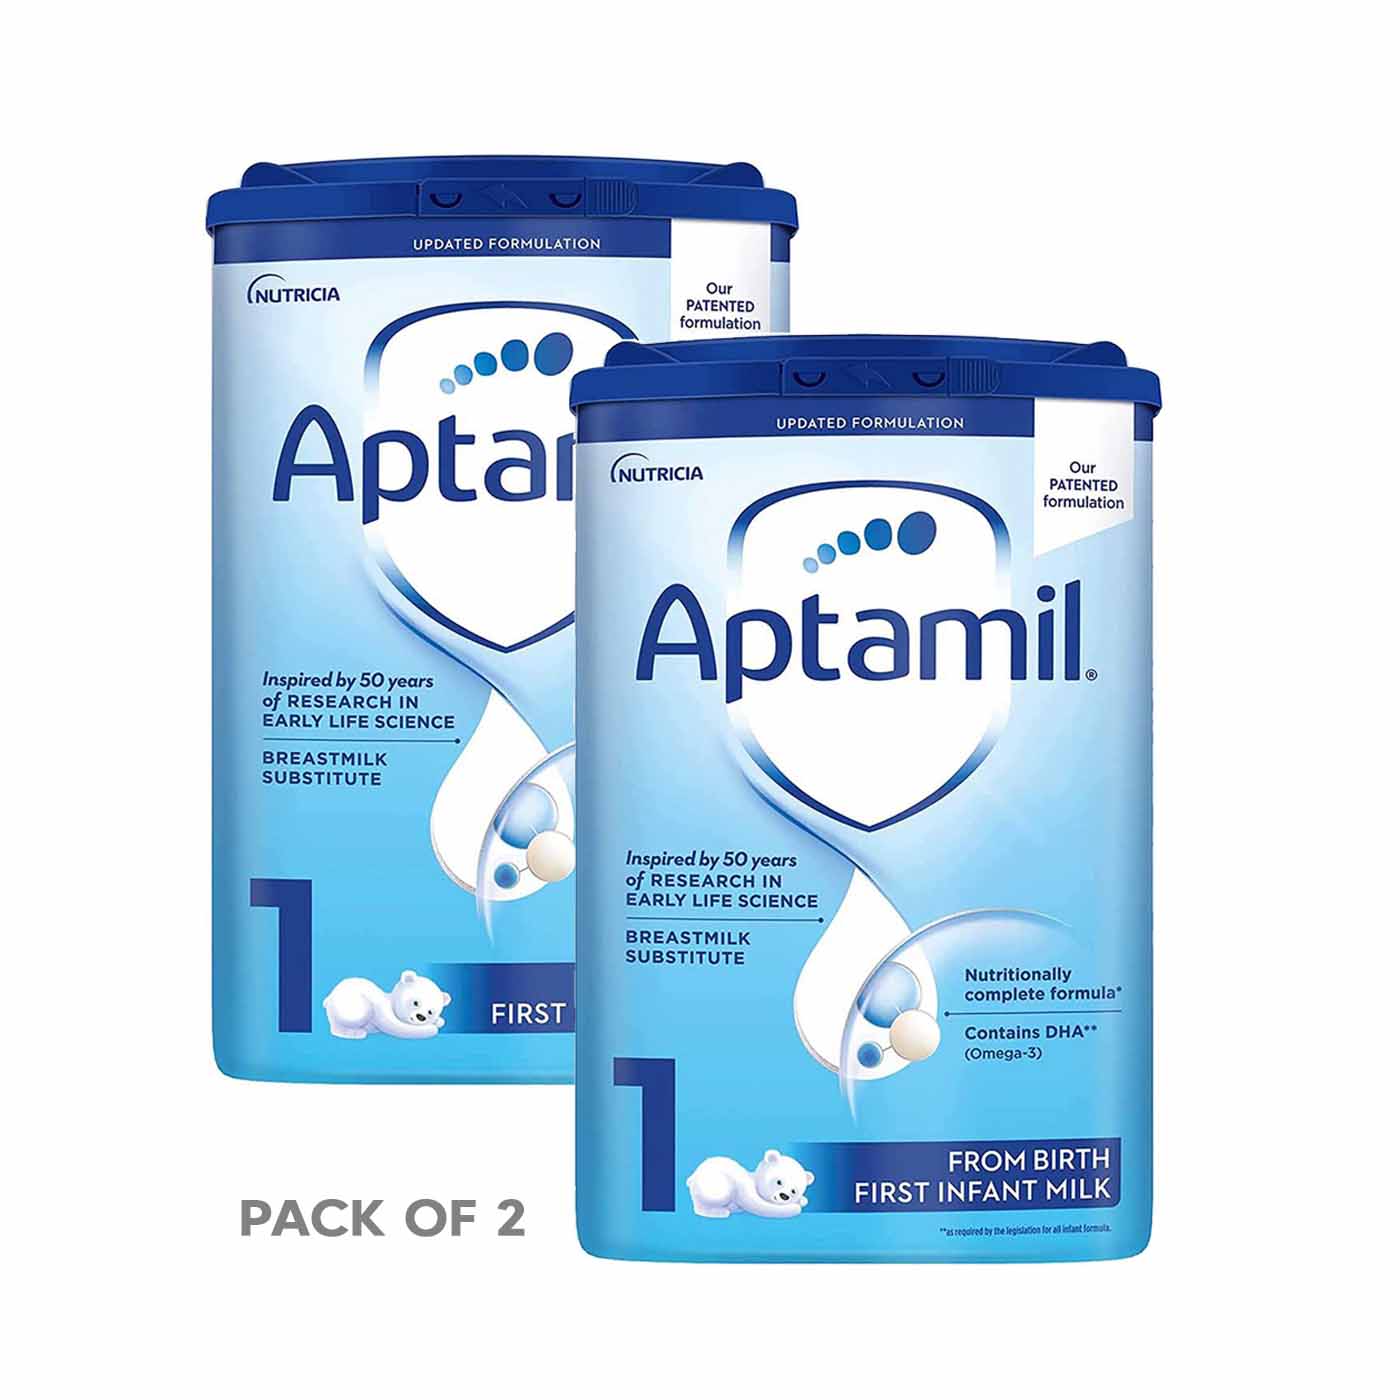 Buy Nutricia Aptamil First Infant Baby Milk from Birth - (Pack of 2) Online in India at uyyaala.com